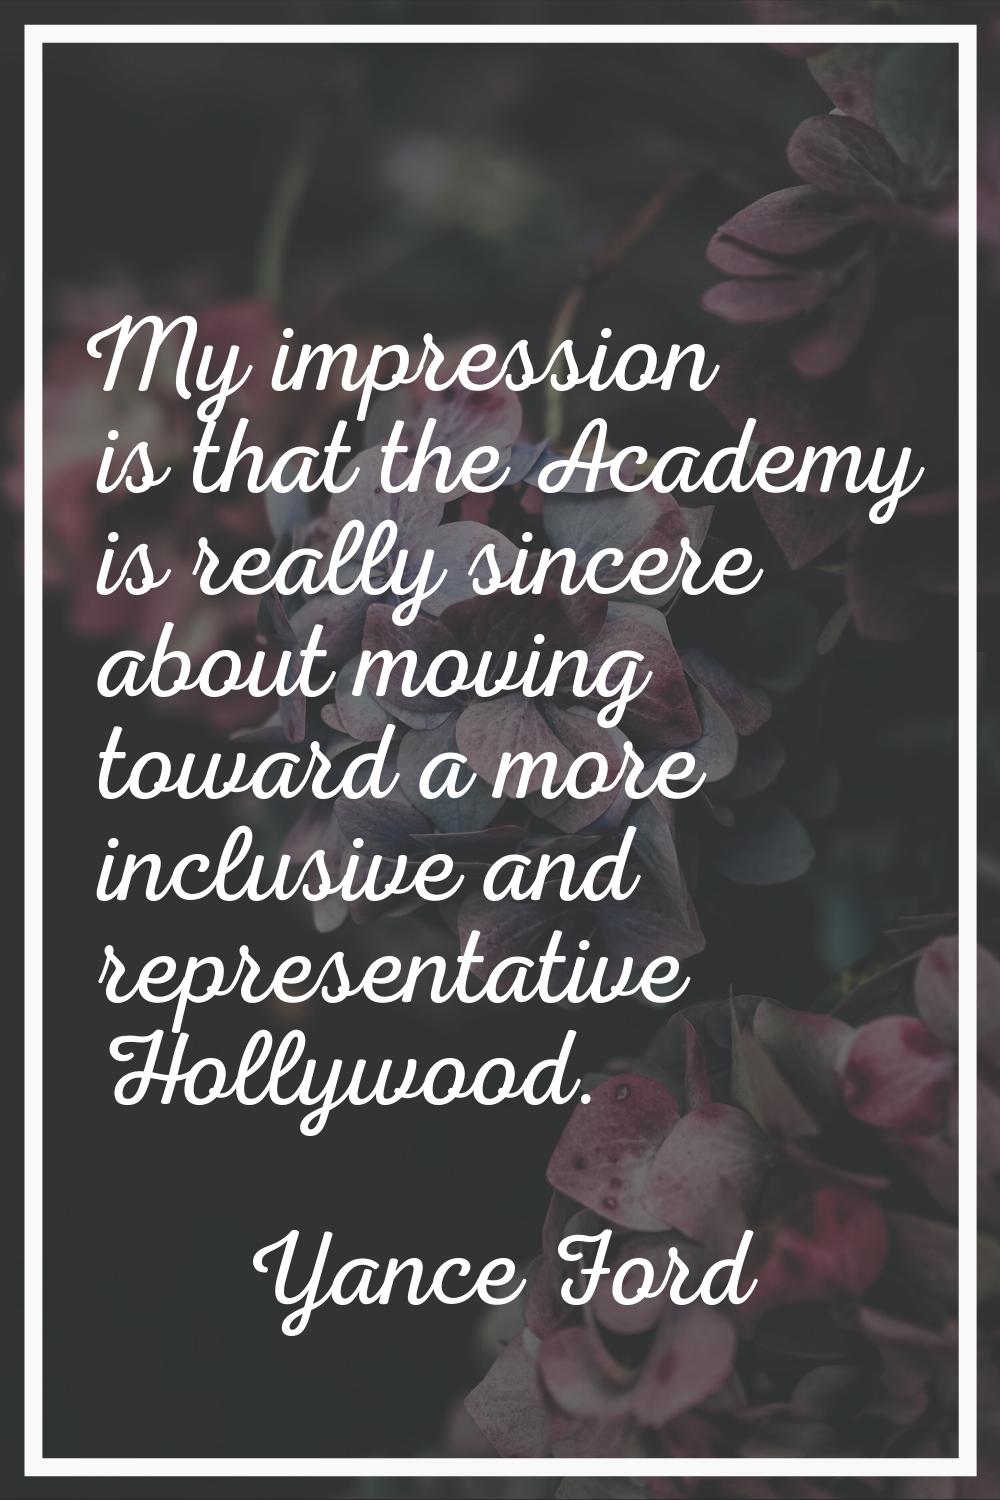 My impression is that the Academy is really sincere about moving toward a more inclusive and repres